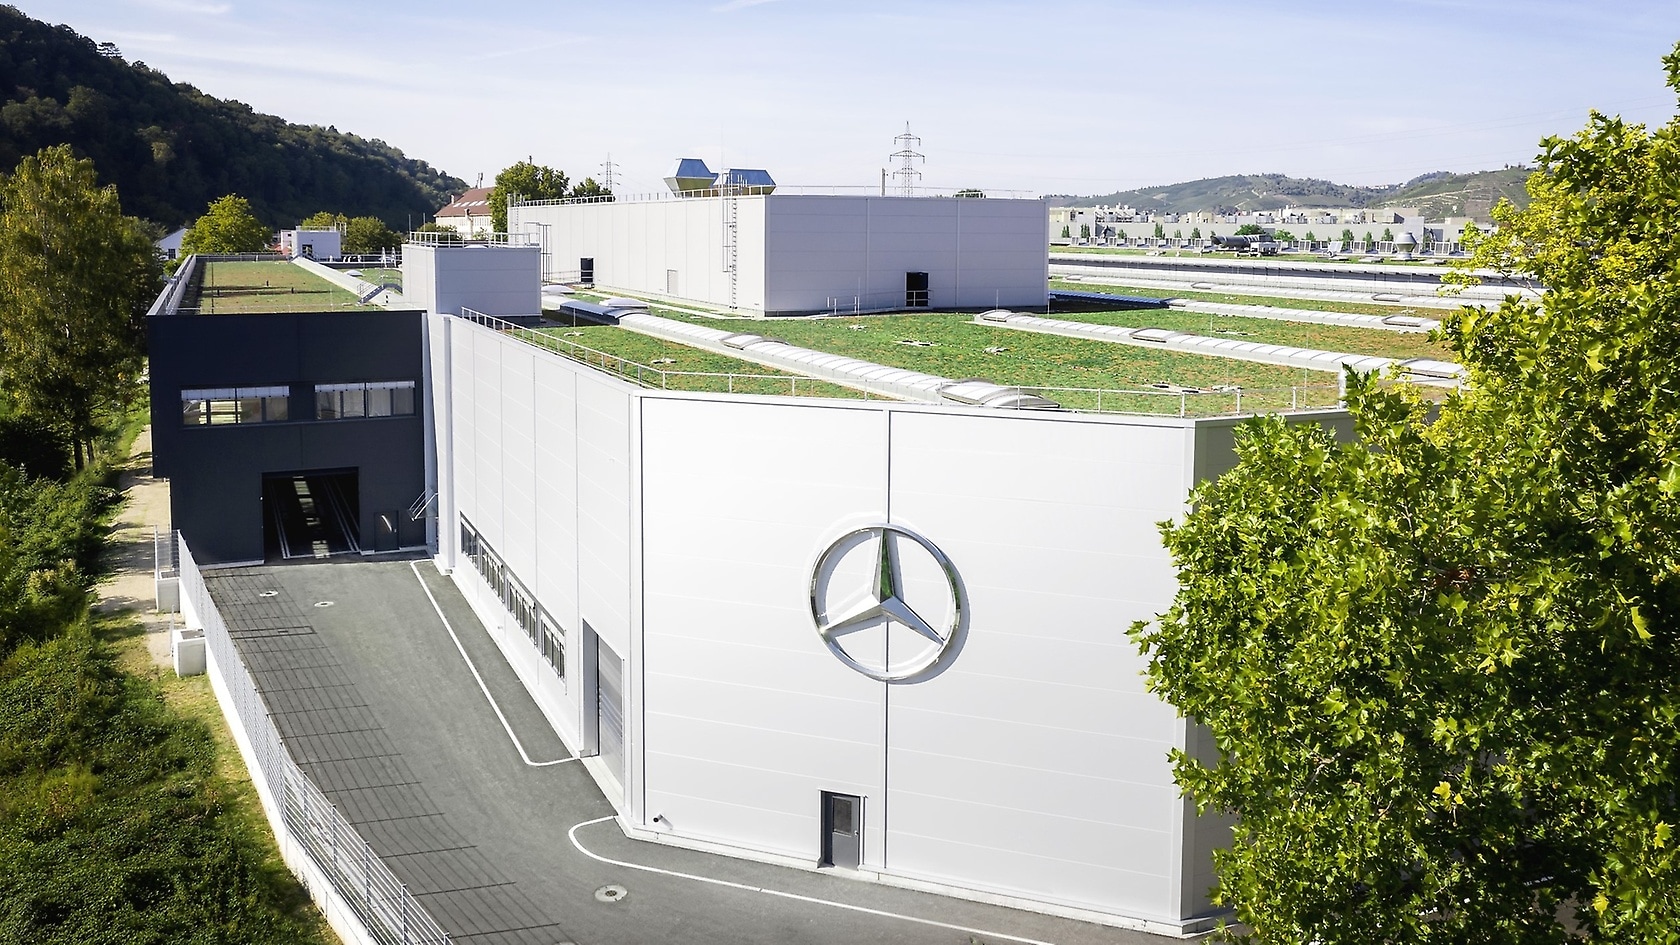 Mercedes-Benz Drive Systems Campus UT